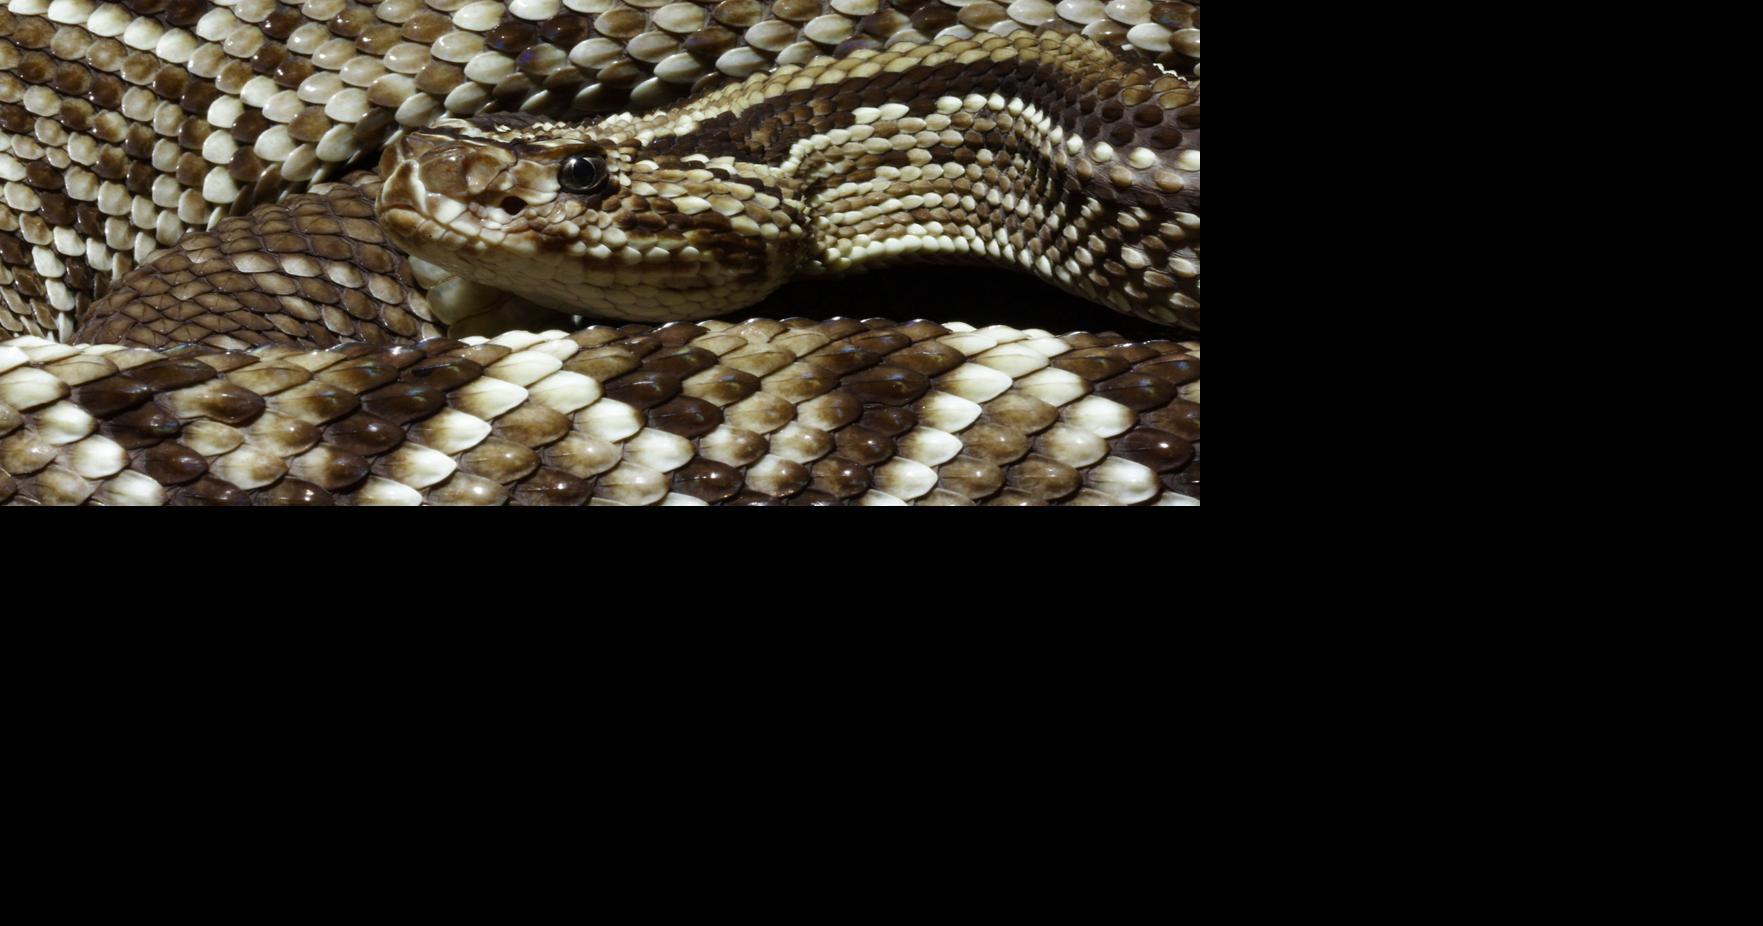 Nebraska rattlesnake was no issue for FedEx driver. ‘Sorry about the blood’